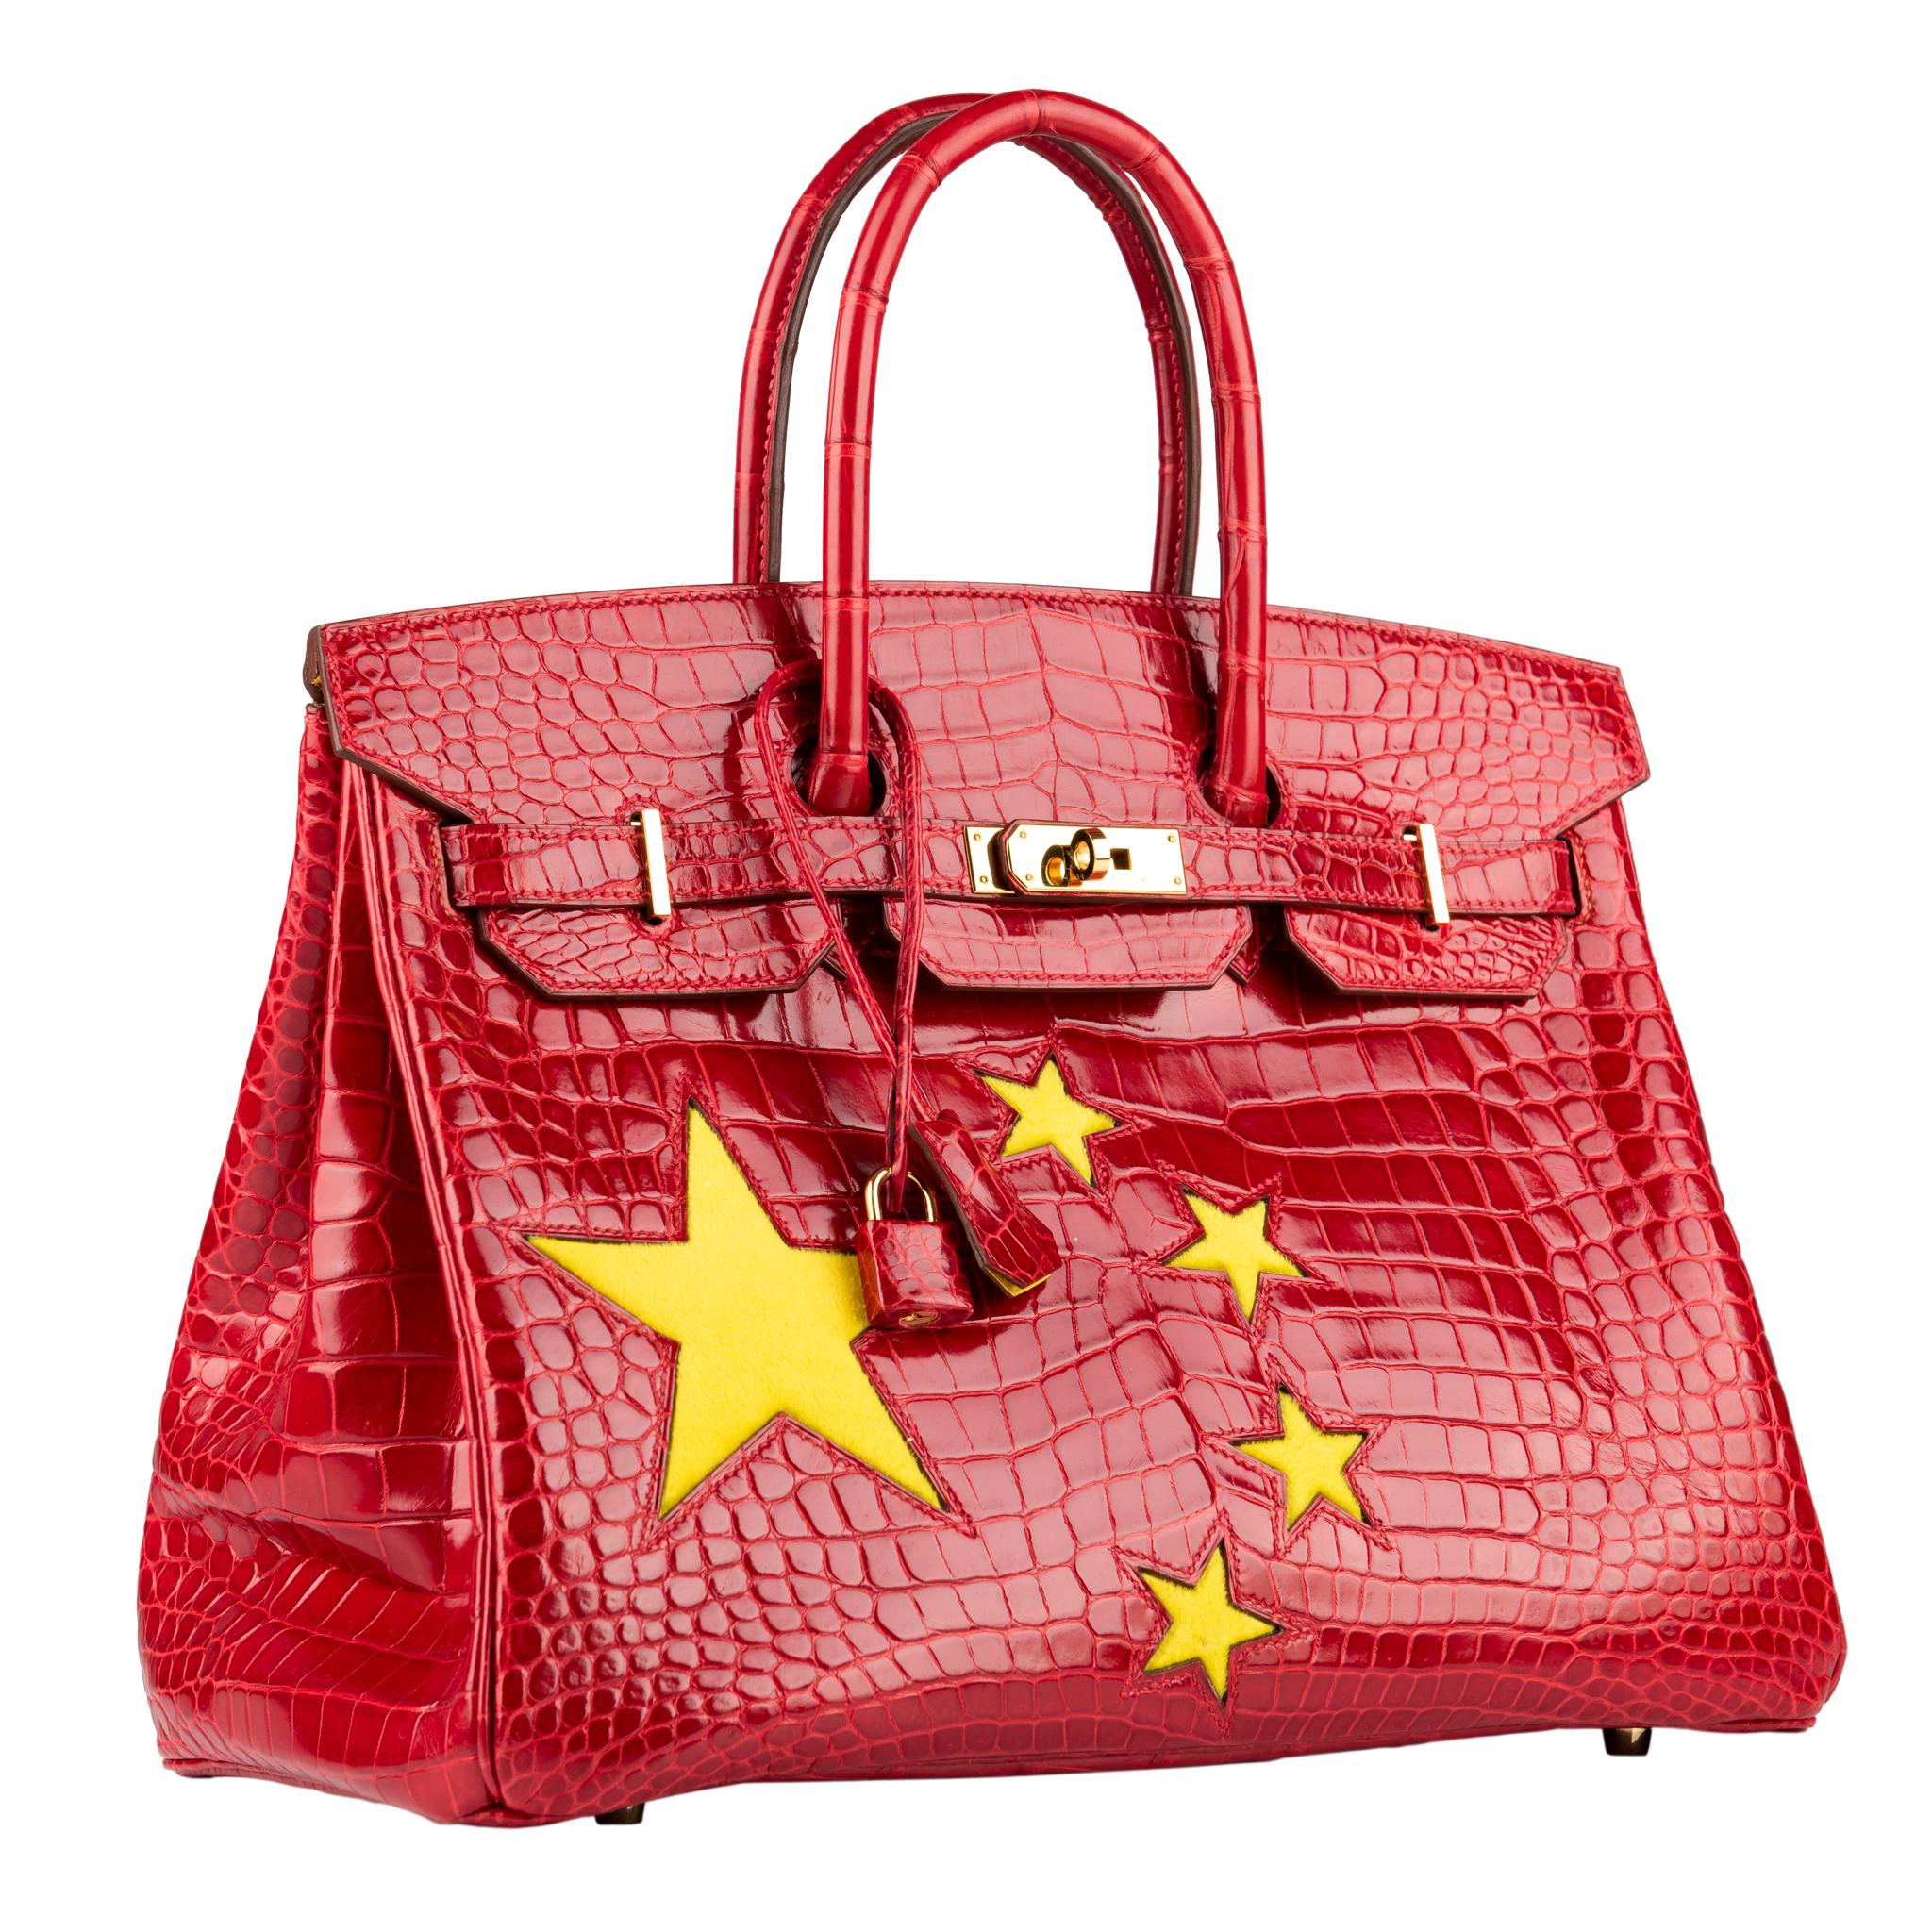 1stdibs Exclusives From Three Over Six

Brand: Hermès 
Style: Birkin “Special Order - China Flag”
Size: 35cm
Color: Braise and Yellow 
Leather: Shiny Porosus Crocodile and Pony Hair
Hardware: Gold
Stamp: 2011 O

Condition: Vintage excellent: This